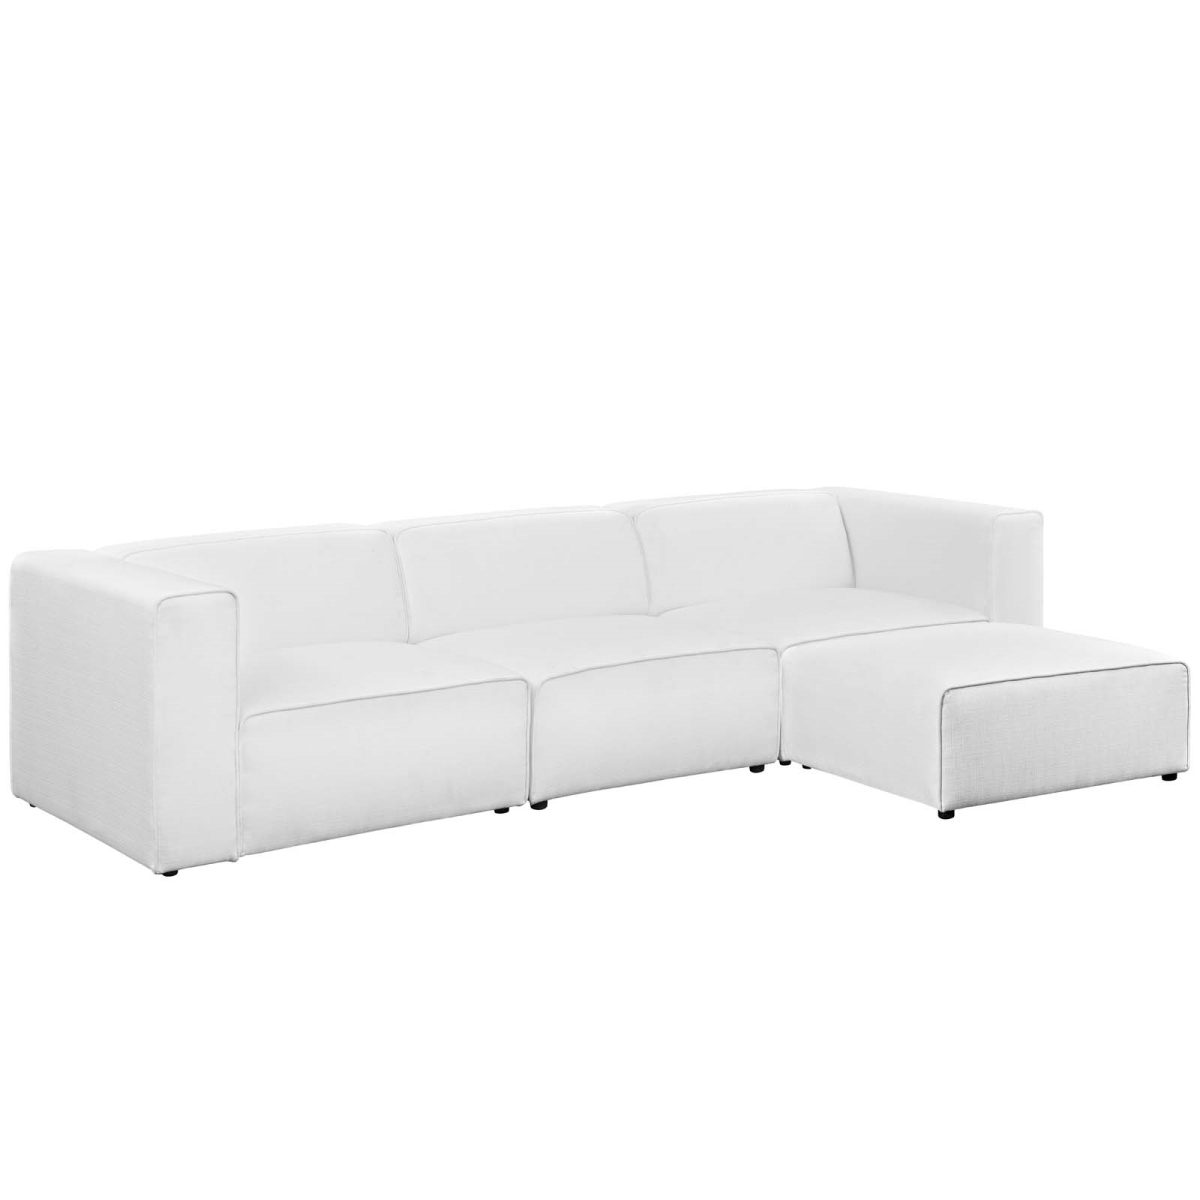 Eei-2831-whi 4 Piece Mingle Upholstered Fabric Sectional Sofa Set - White, 27 X 121.5 X 37 In.